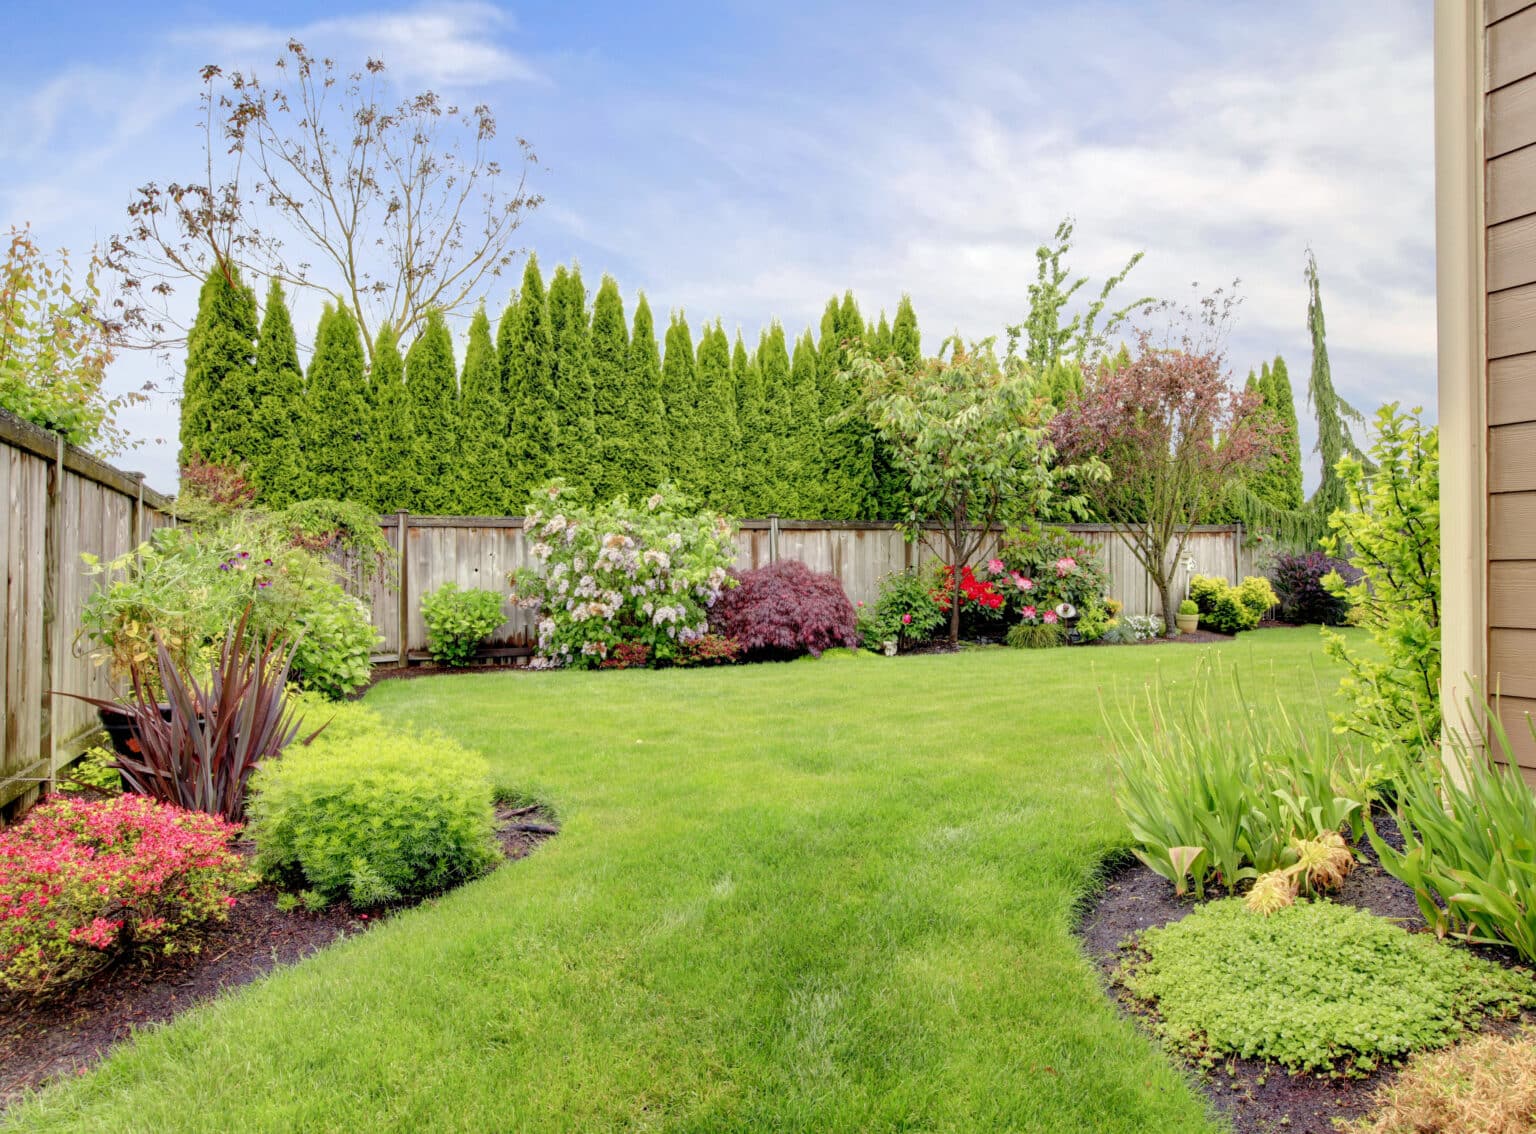 Fenced,Backyard.,View,Of,Lawn,And,Blooming,Flower,Beds